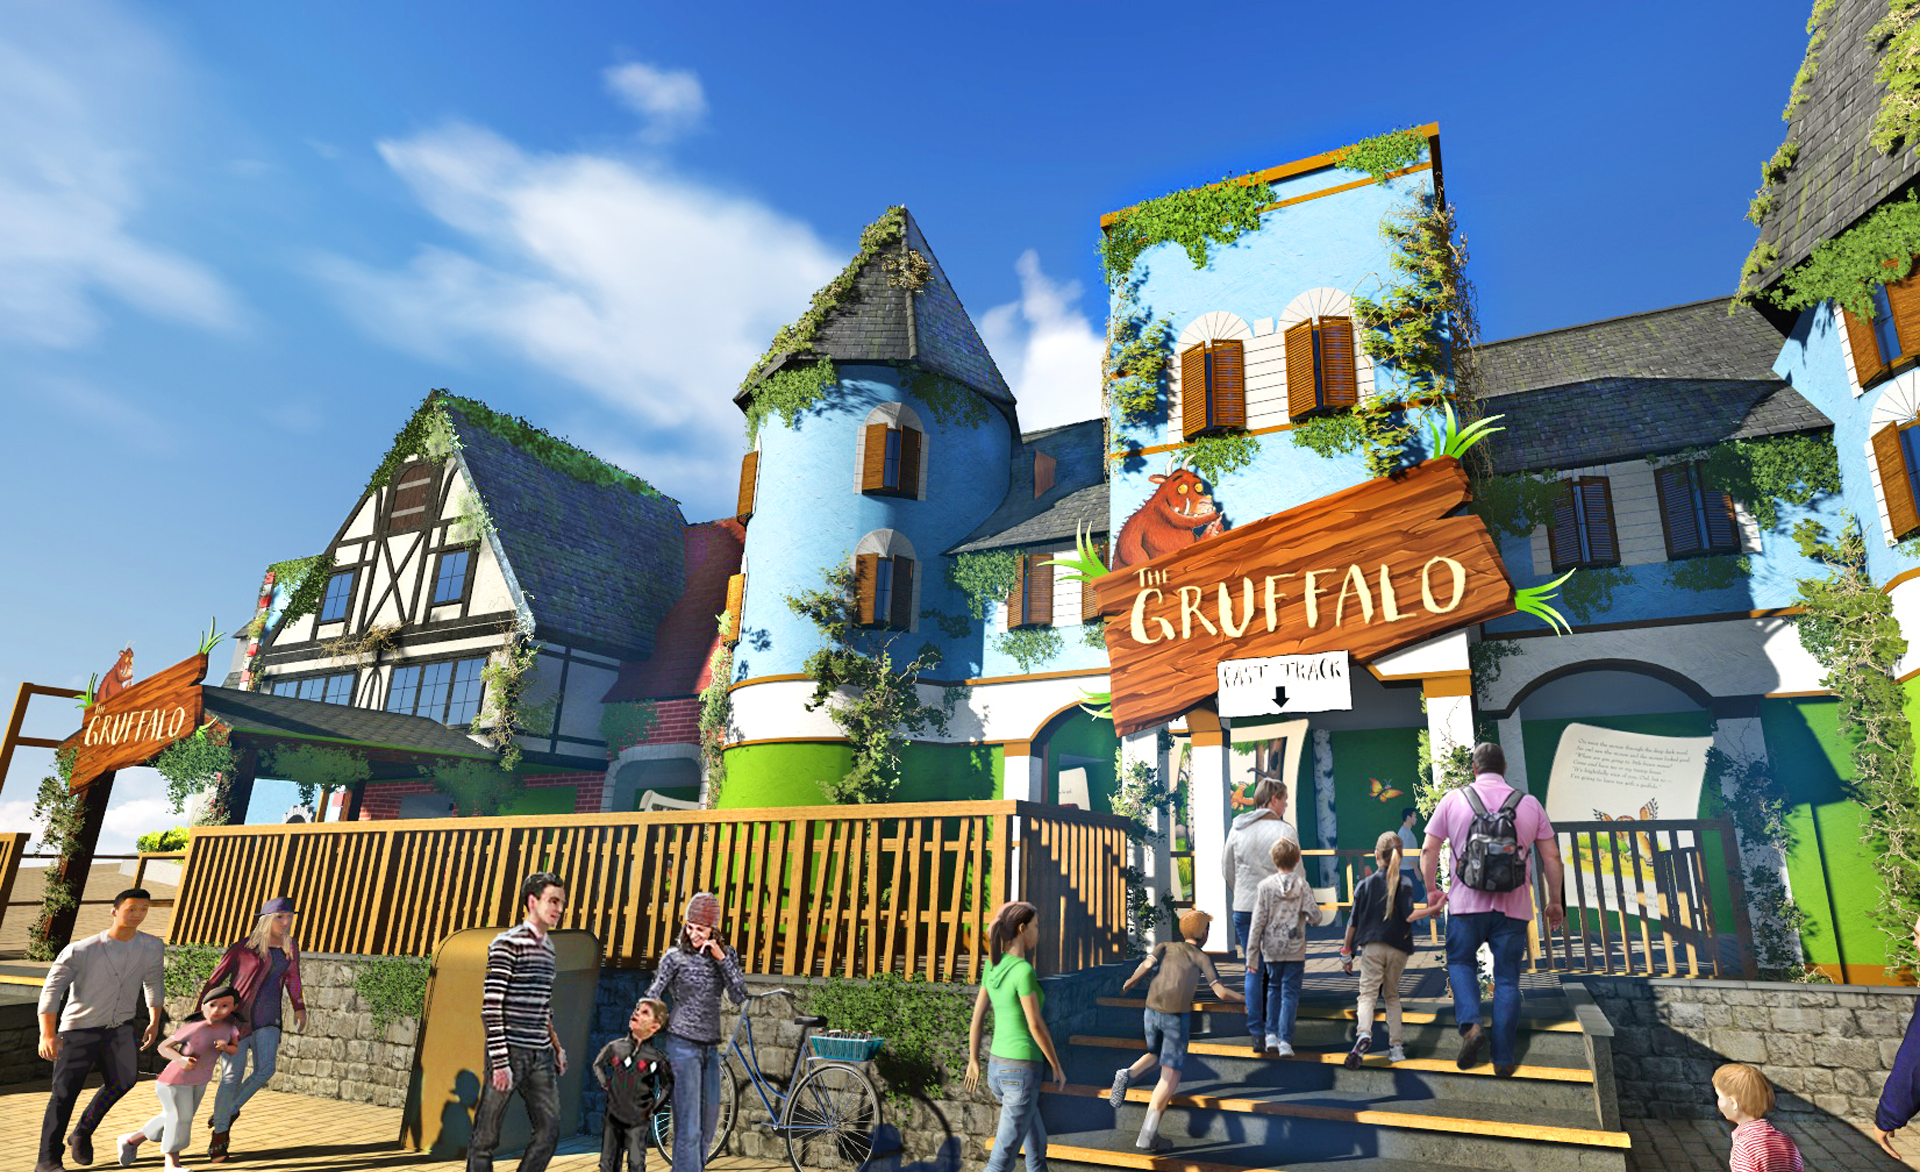 A concept image of the outside of The Gruffalo ride with people walking into the entrance